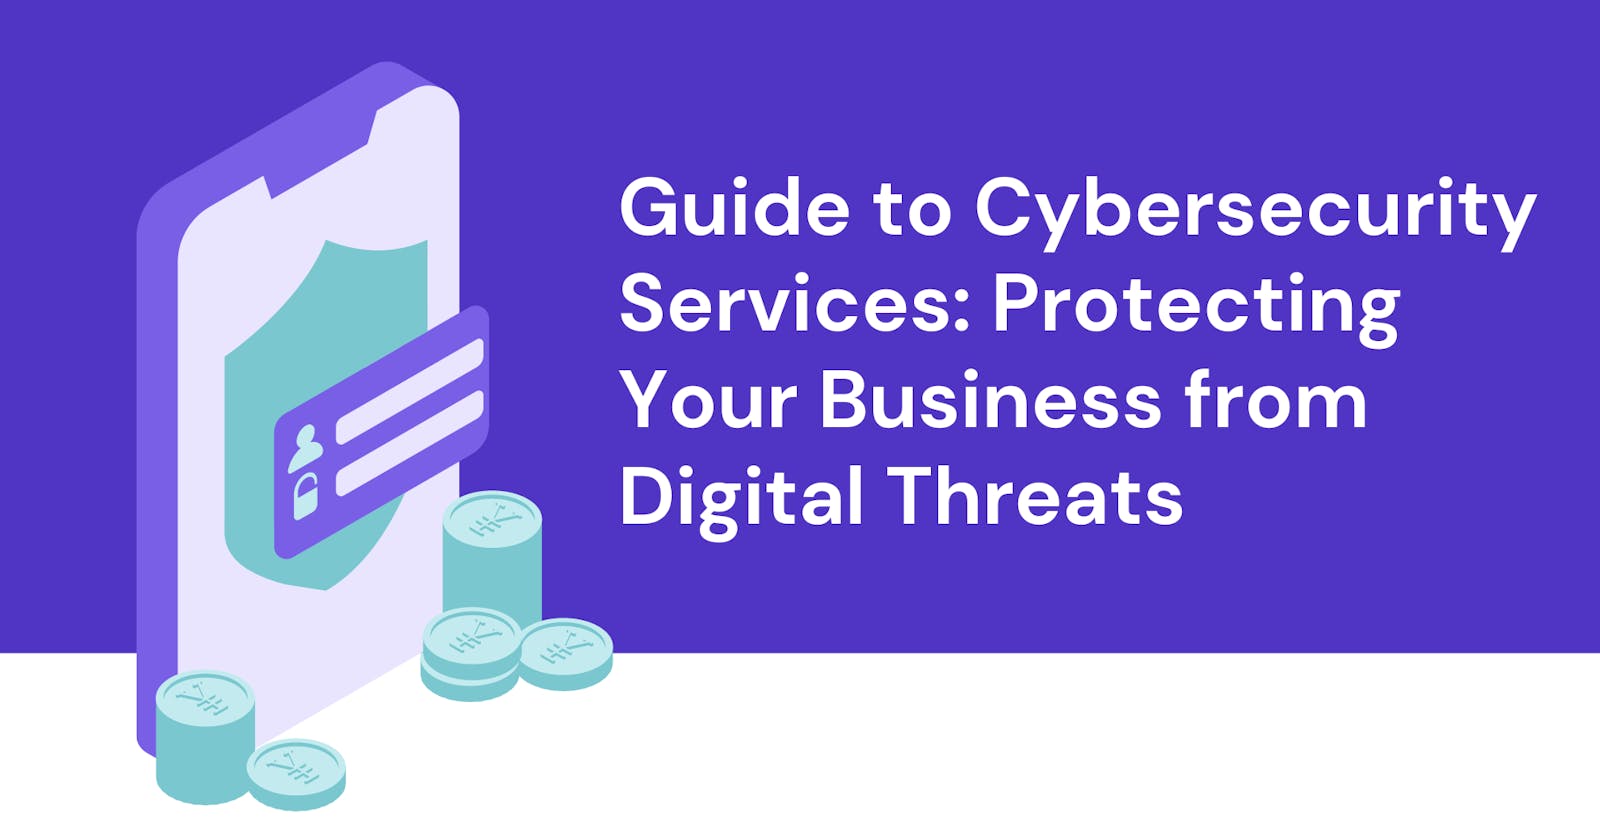 Guide to Cybersecurity Services: Protecting Your Business from Digital Threats